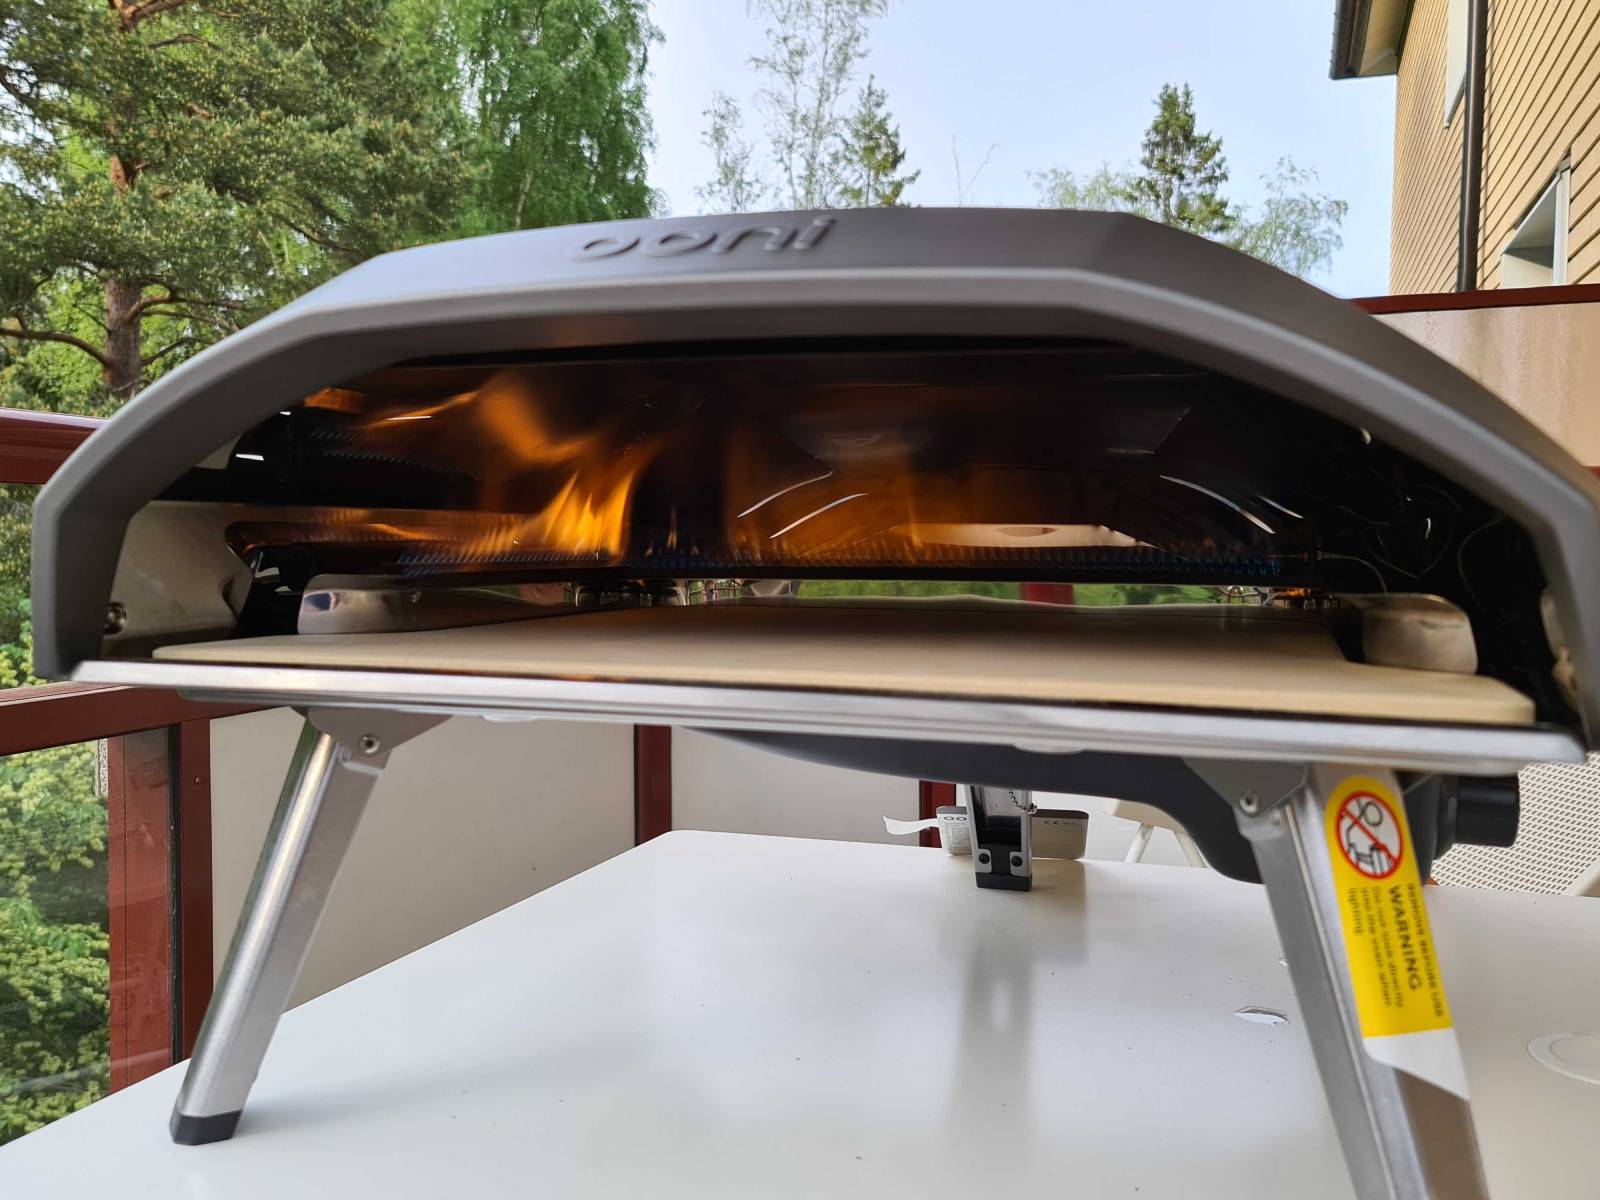 Portable Pizza Oven Review 2019: The Ooni Koda Pizza Oven